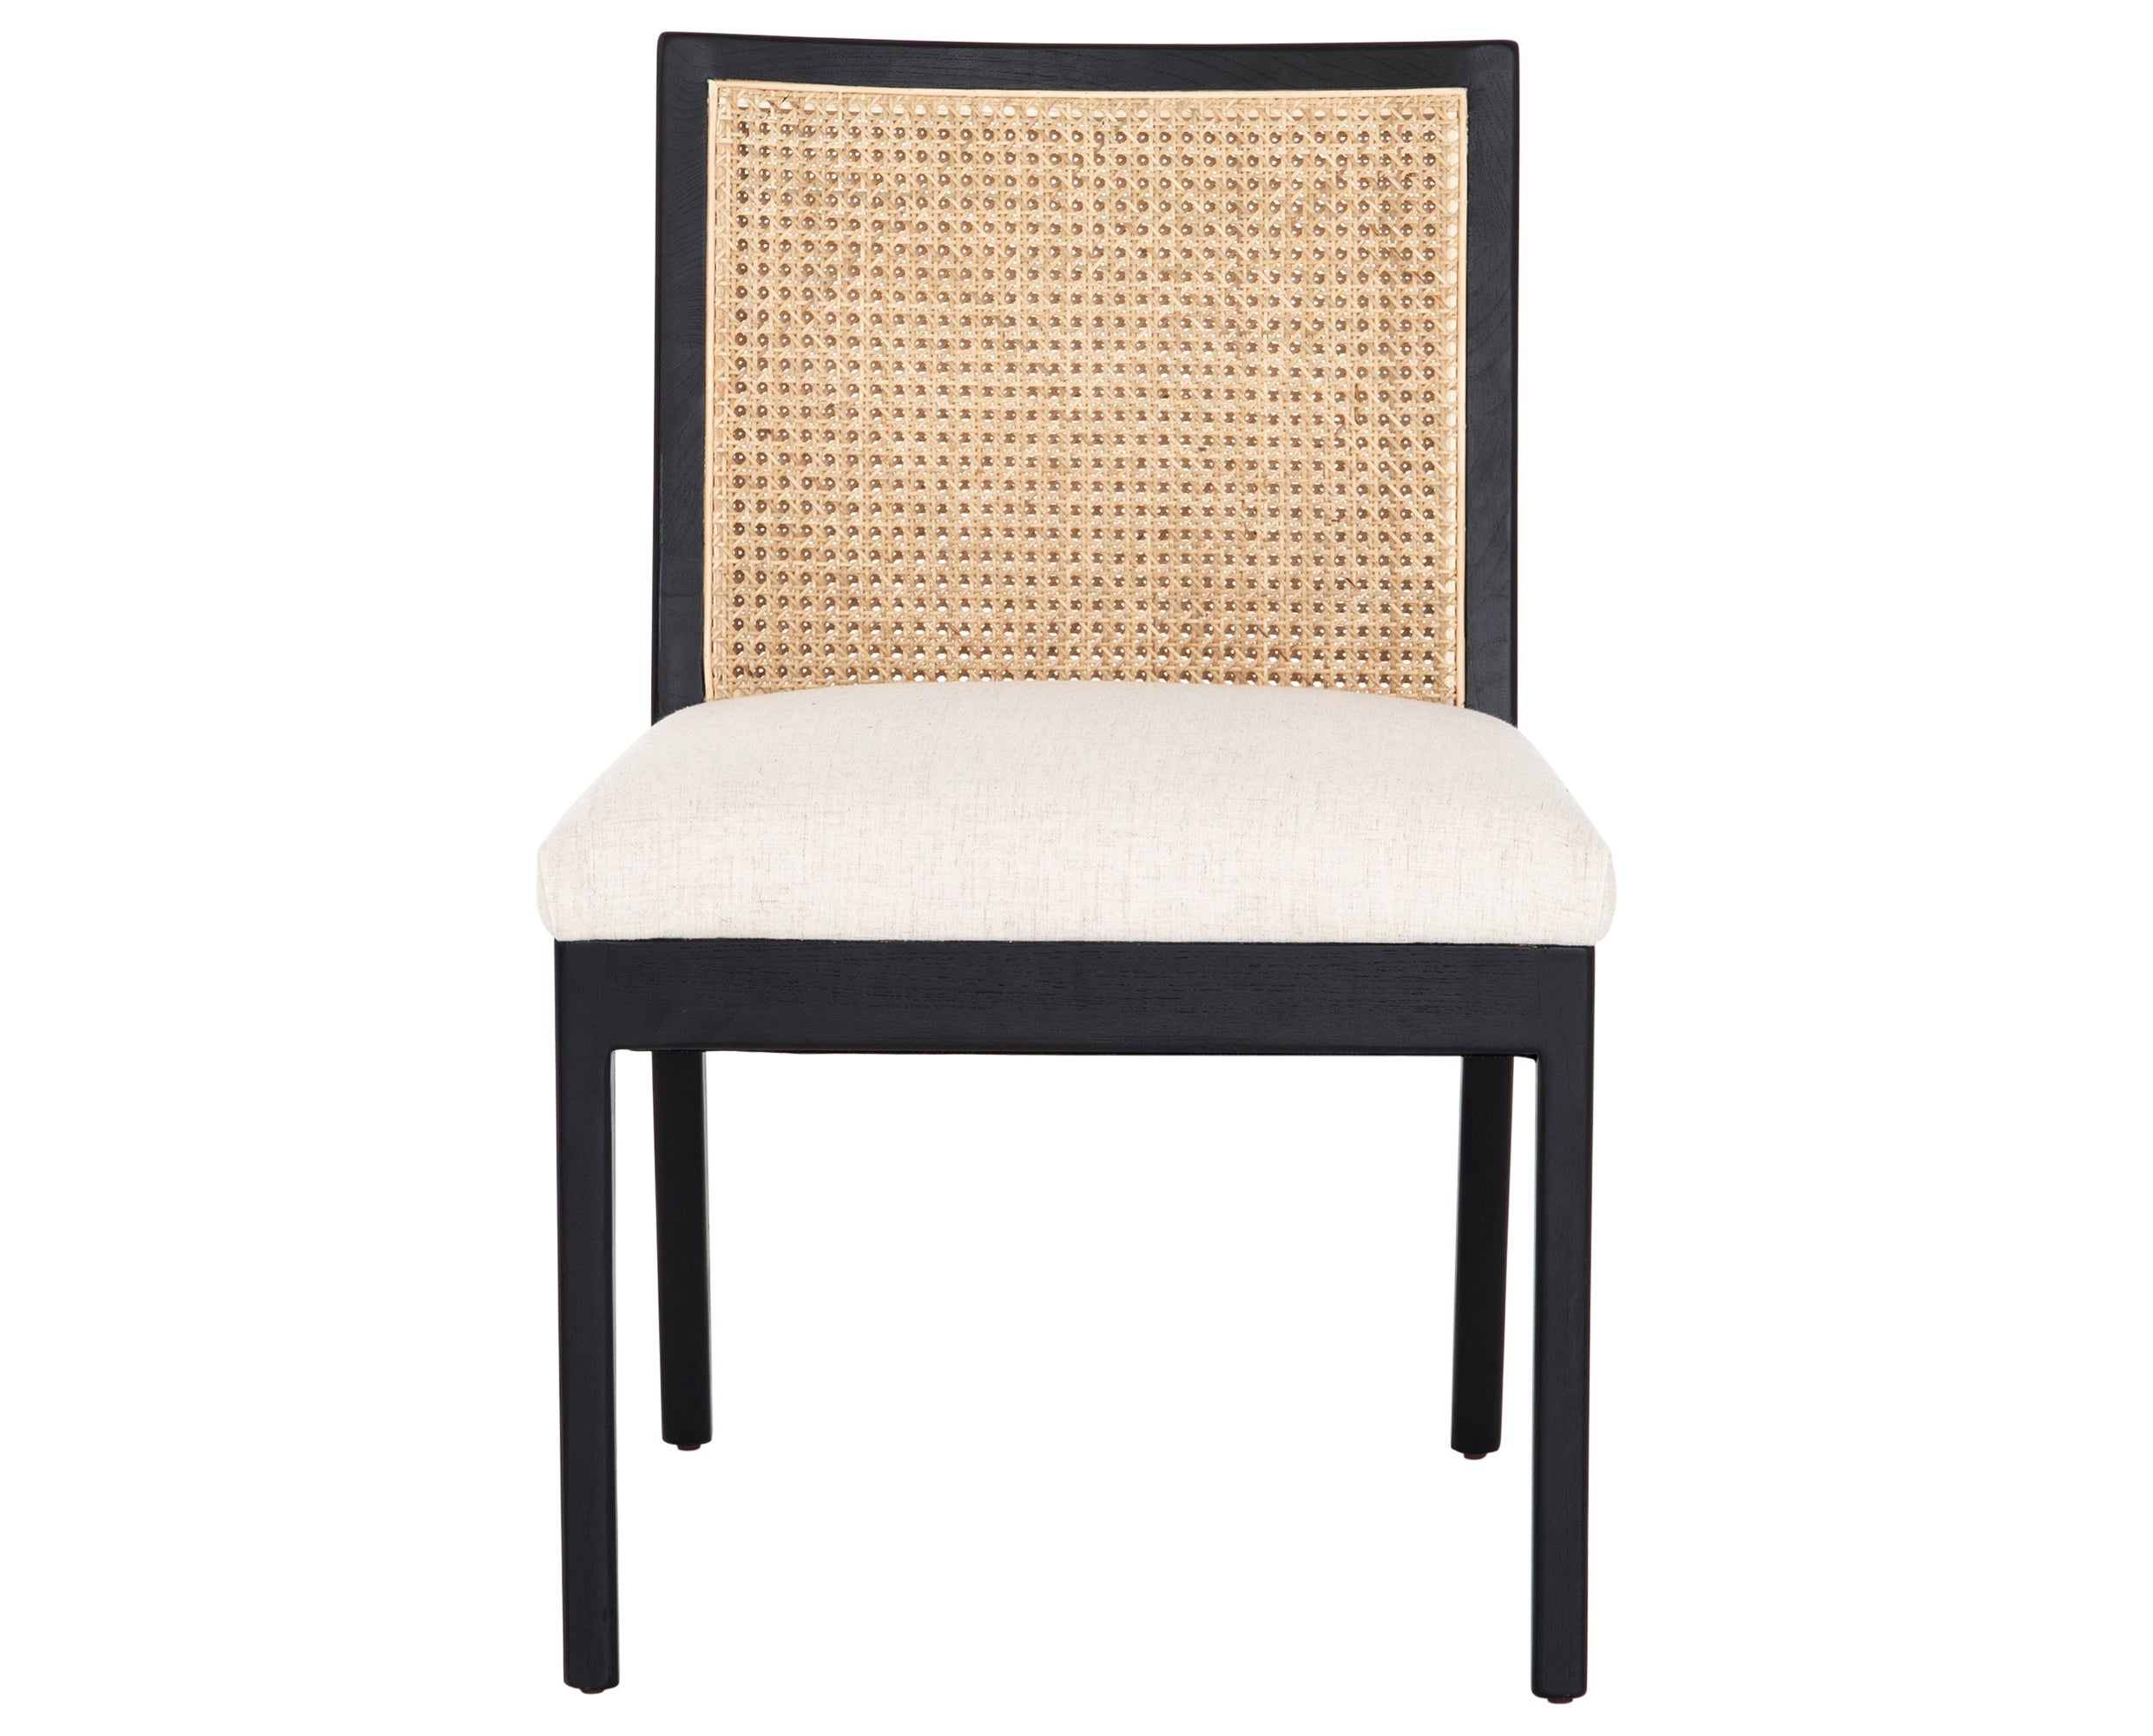 Savile Flax Fabric and Brushed Ebony Nettlewood with Light Natural Cane | Antonia Cane Armless Dining Chair | Valley Ridge Furniture